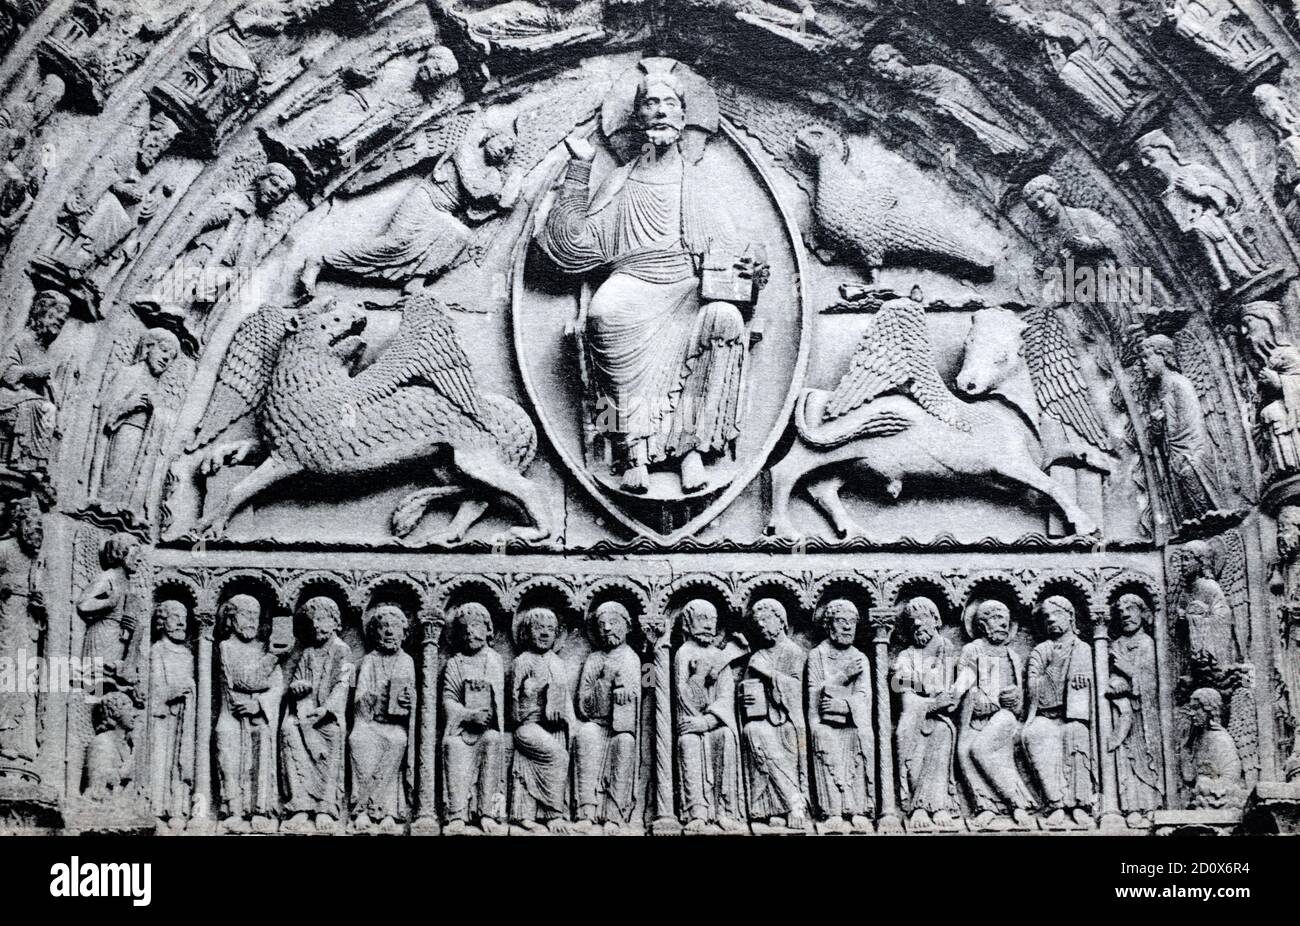 A historical view of the central tympanum above the Royal Portal of Chartres Cathedral showing Christ seated on a throne, Chartres, Centre-Val de Loire, France, taken from a postcard c.early 1900s. Stock Photo